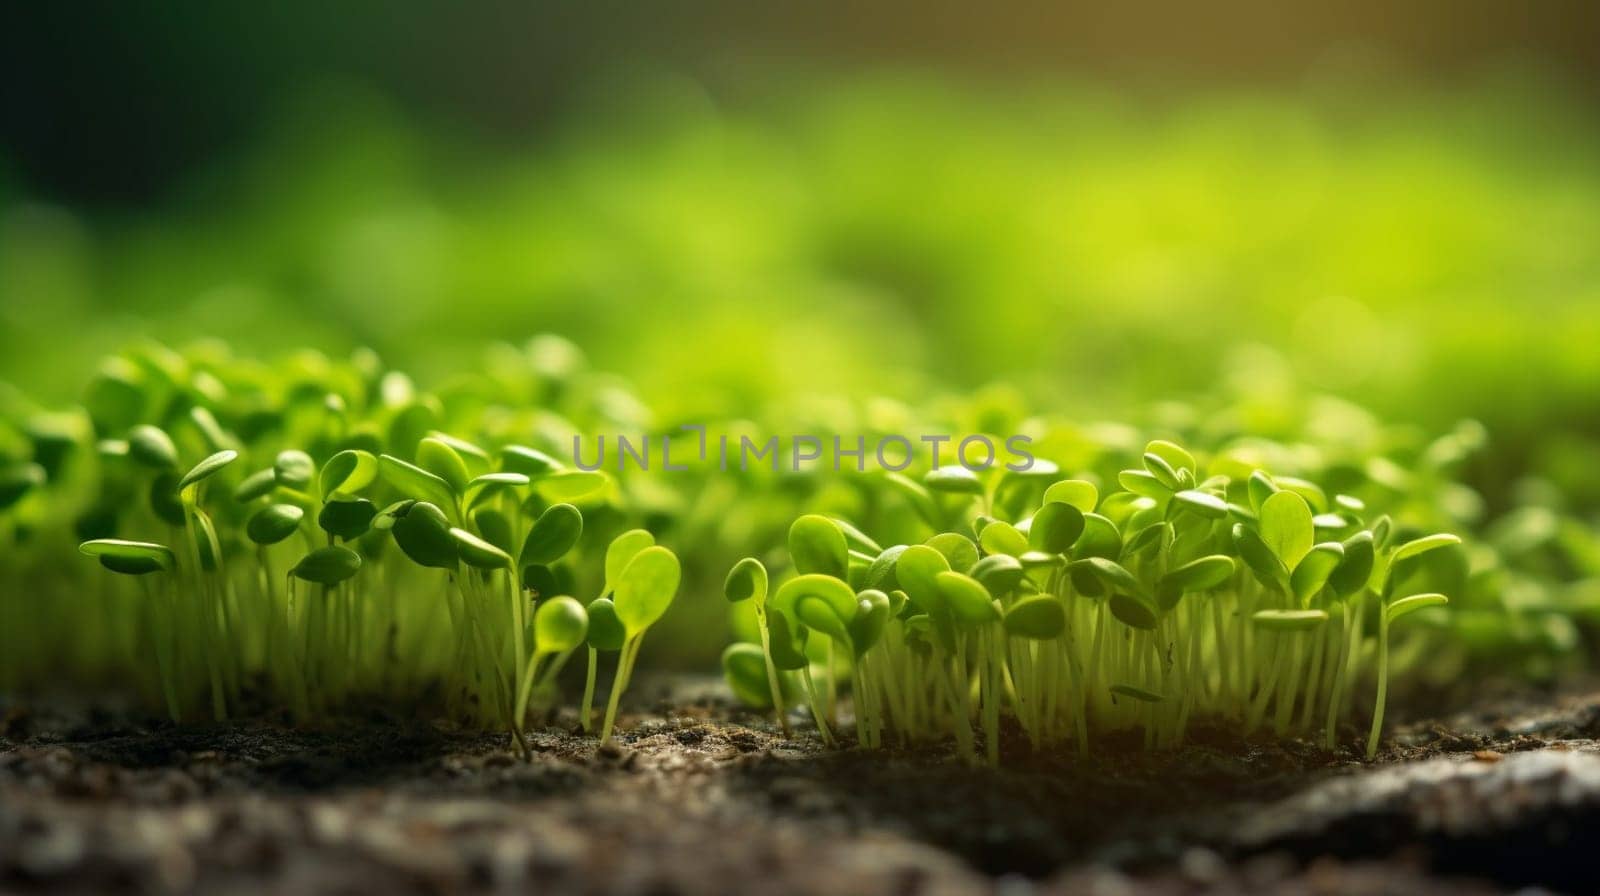 A variety of small green plants, including grasses, shrubs, and flowering plants, are sprouting from the ground, creating a natural landscape of lush vegetation